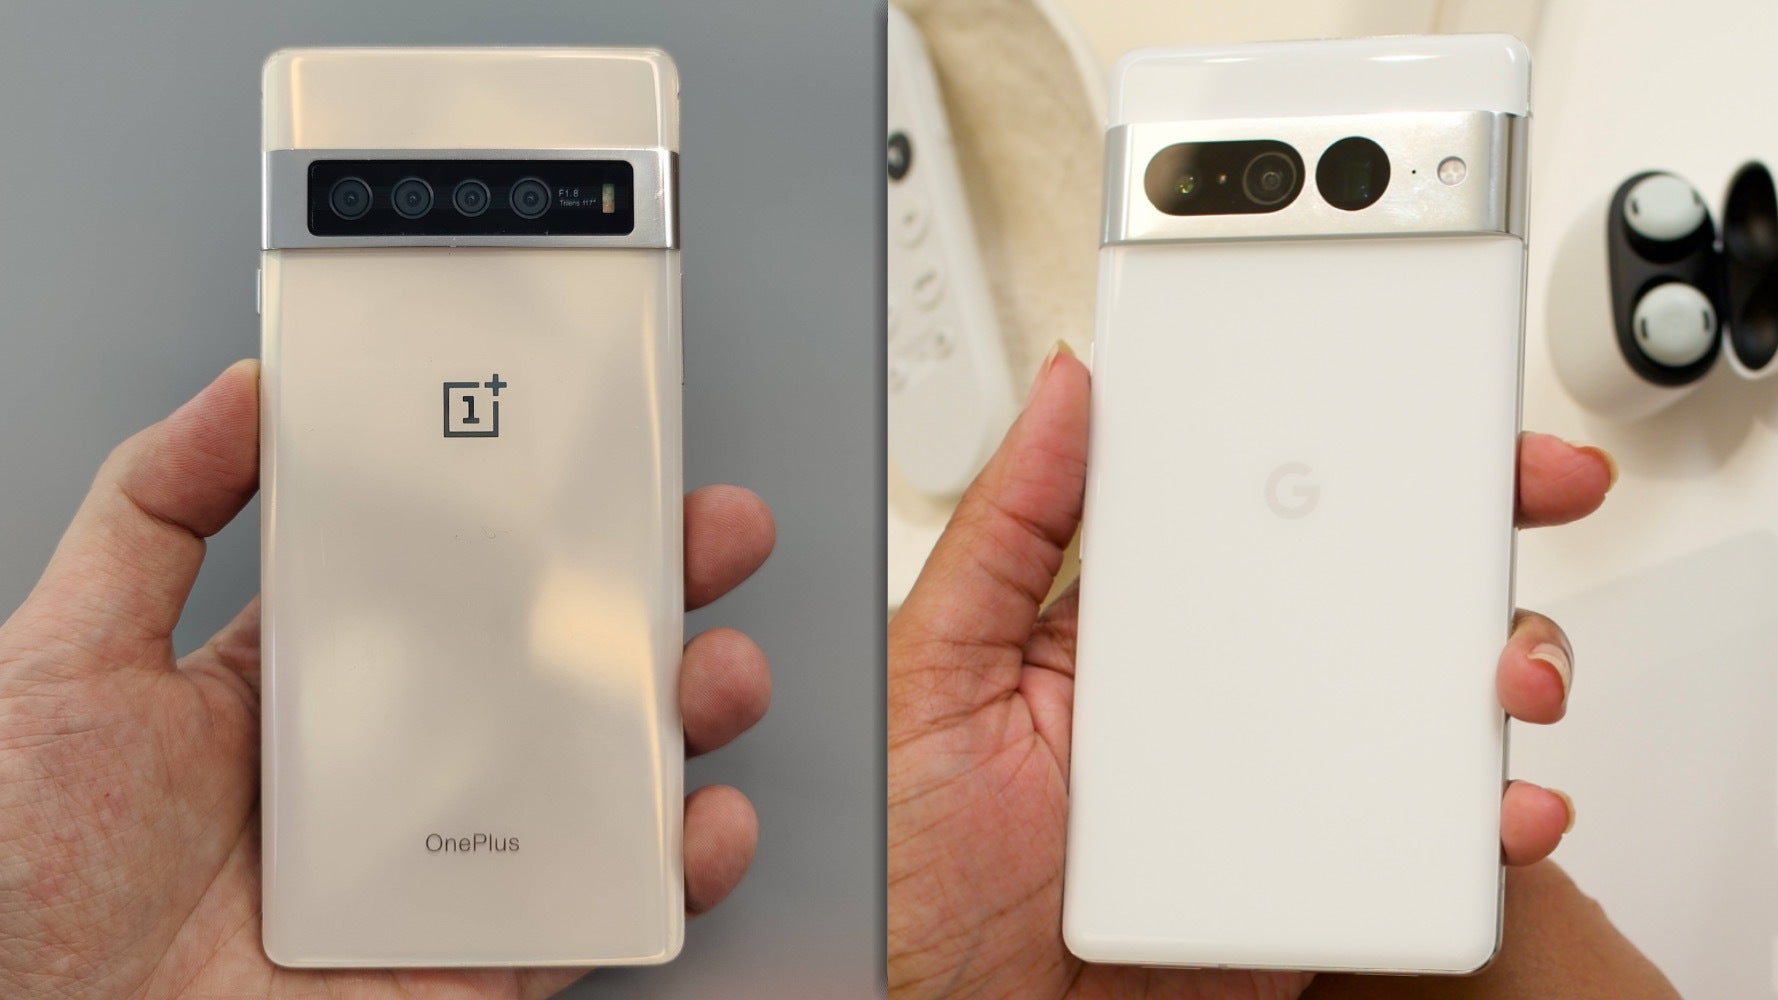 Just take a look at the Pixel 7 Pro next to the unreleased OnePlus 7 Pro prototype with a similar metal camera bar. - Google gone mad! Scrapping iconic Pixel 6 design for basic Pixel 7 - a mistake Apple wouldn’t make